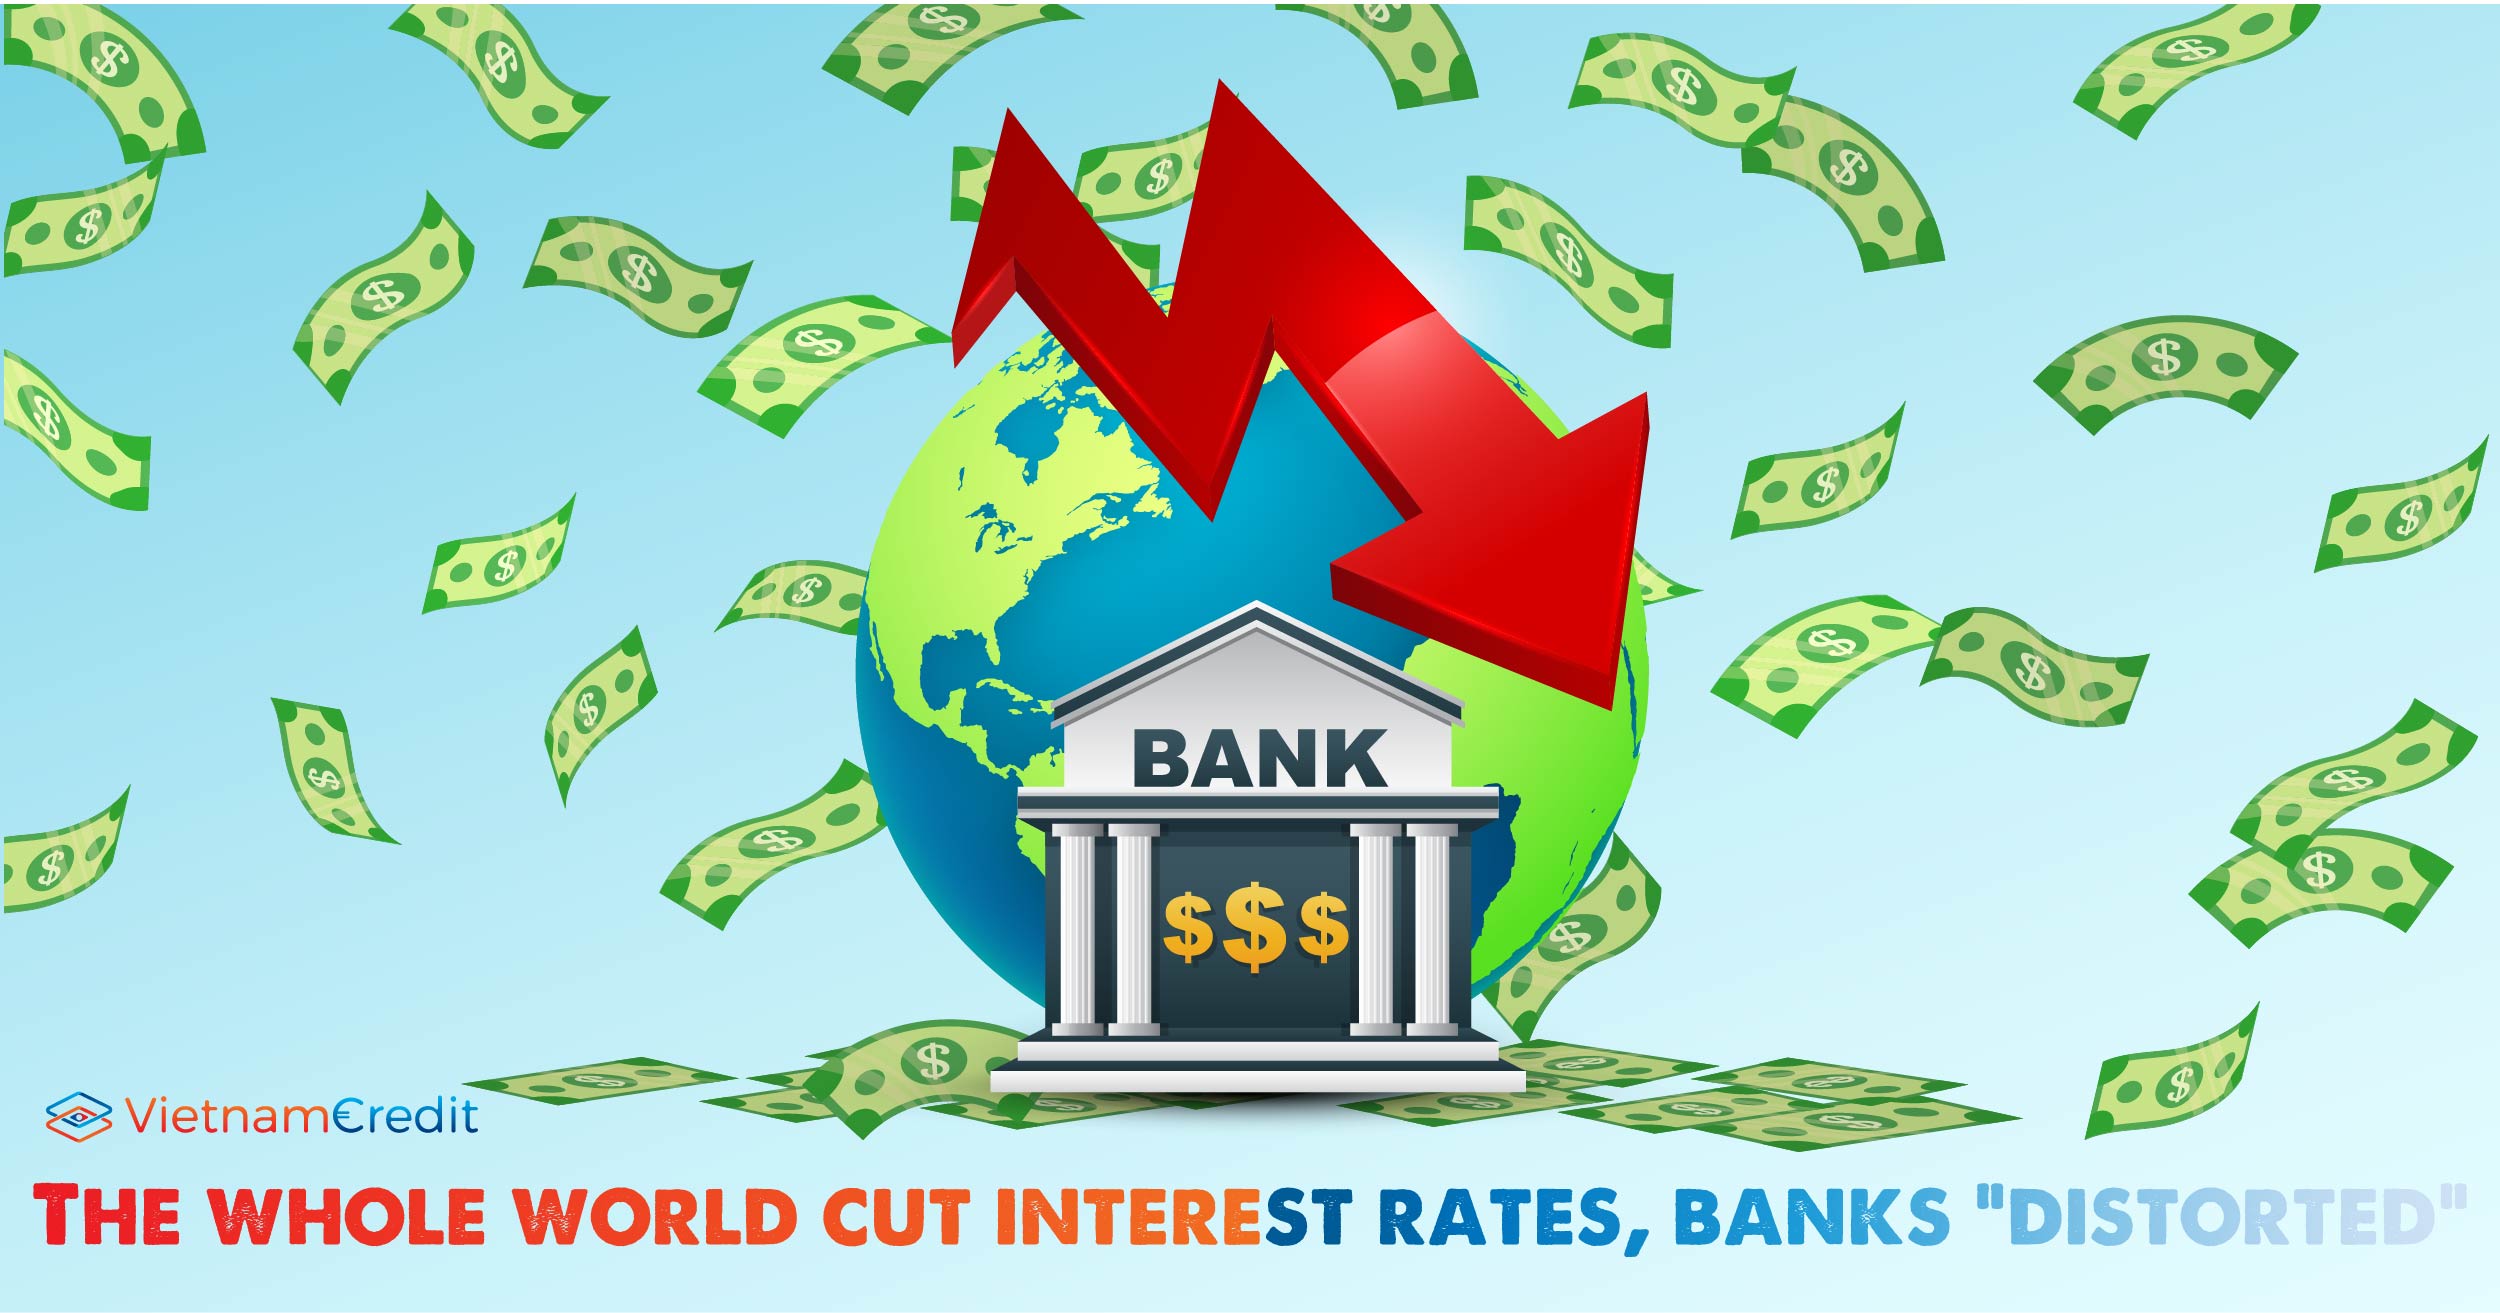 The whole world cut interest rates, banks distorted